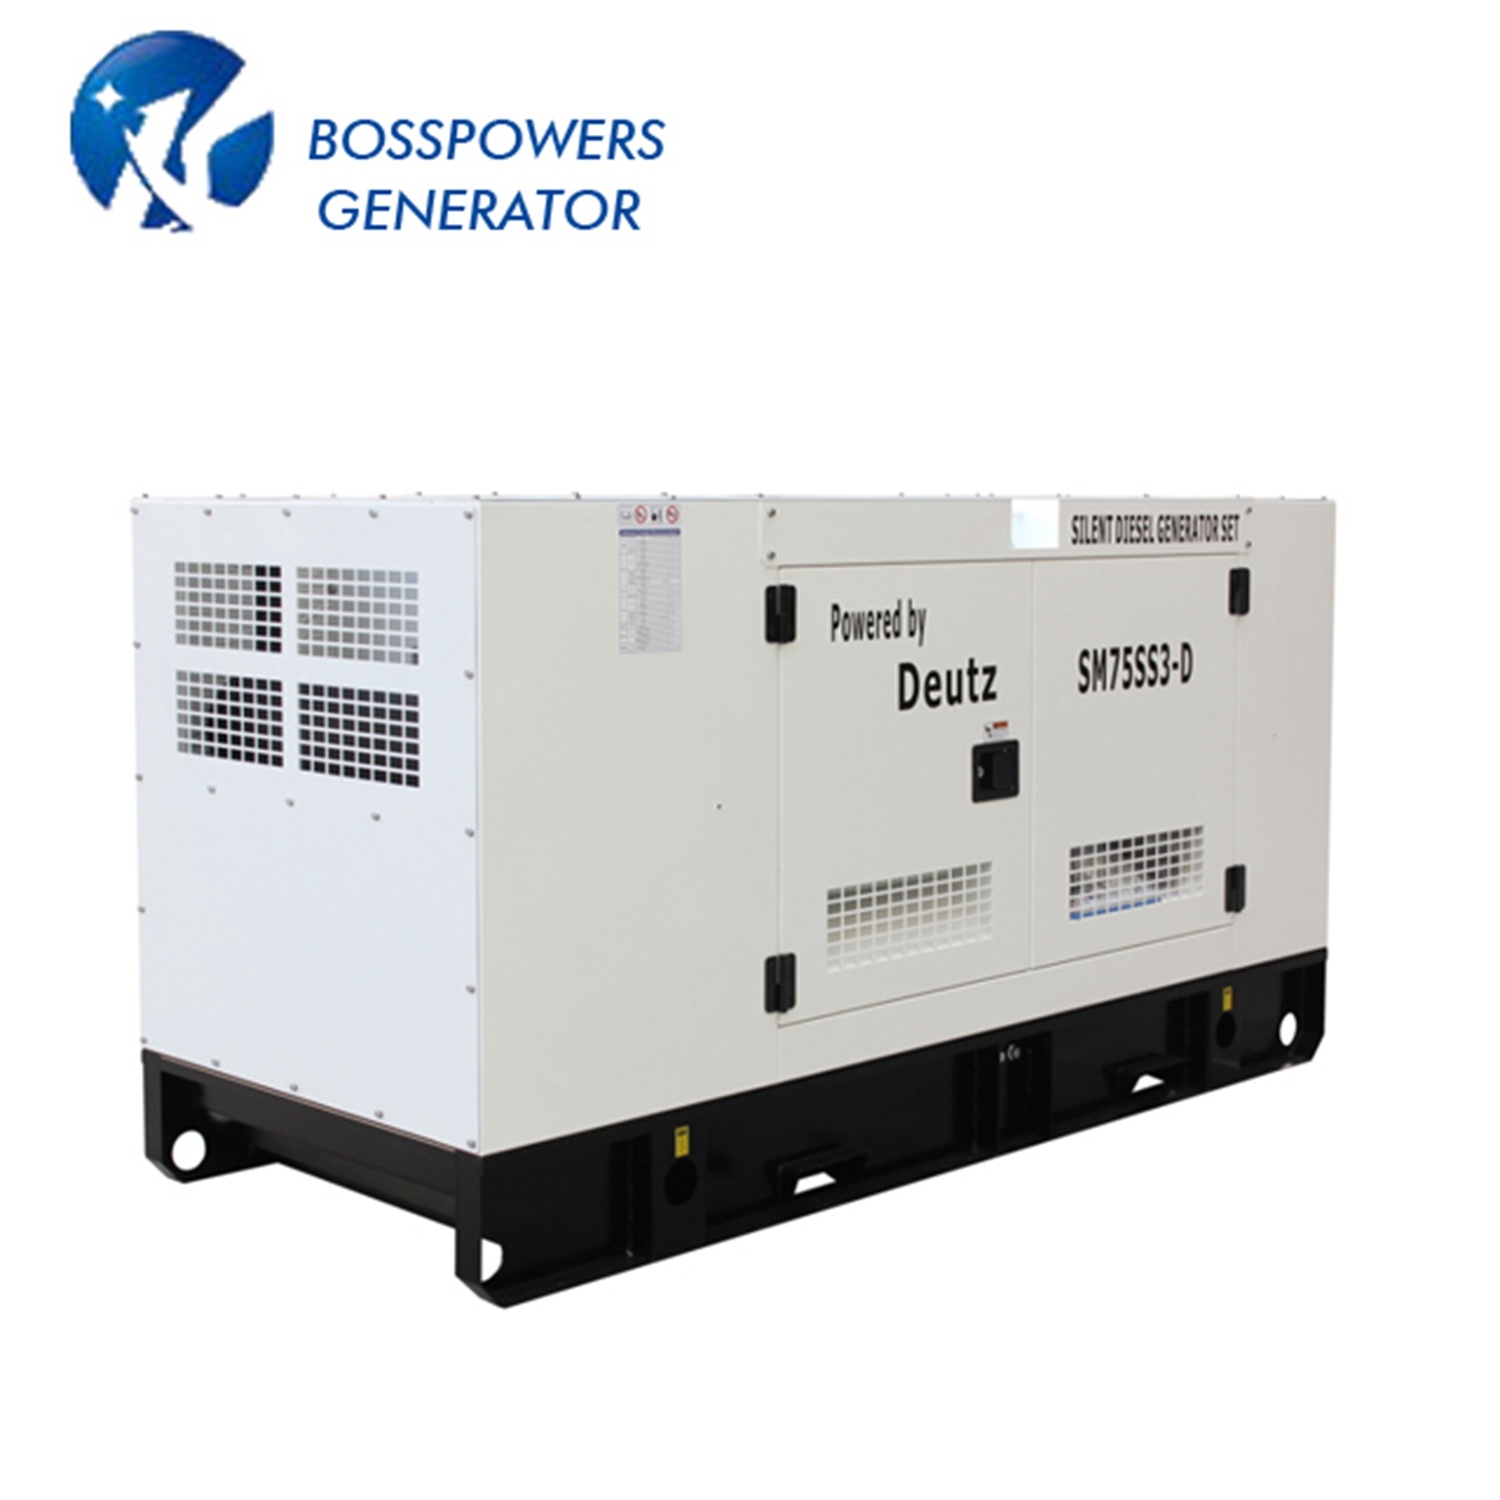 38kw 60Hz Water Cooled Yangdong Home Use Silent Diesel Generator